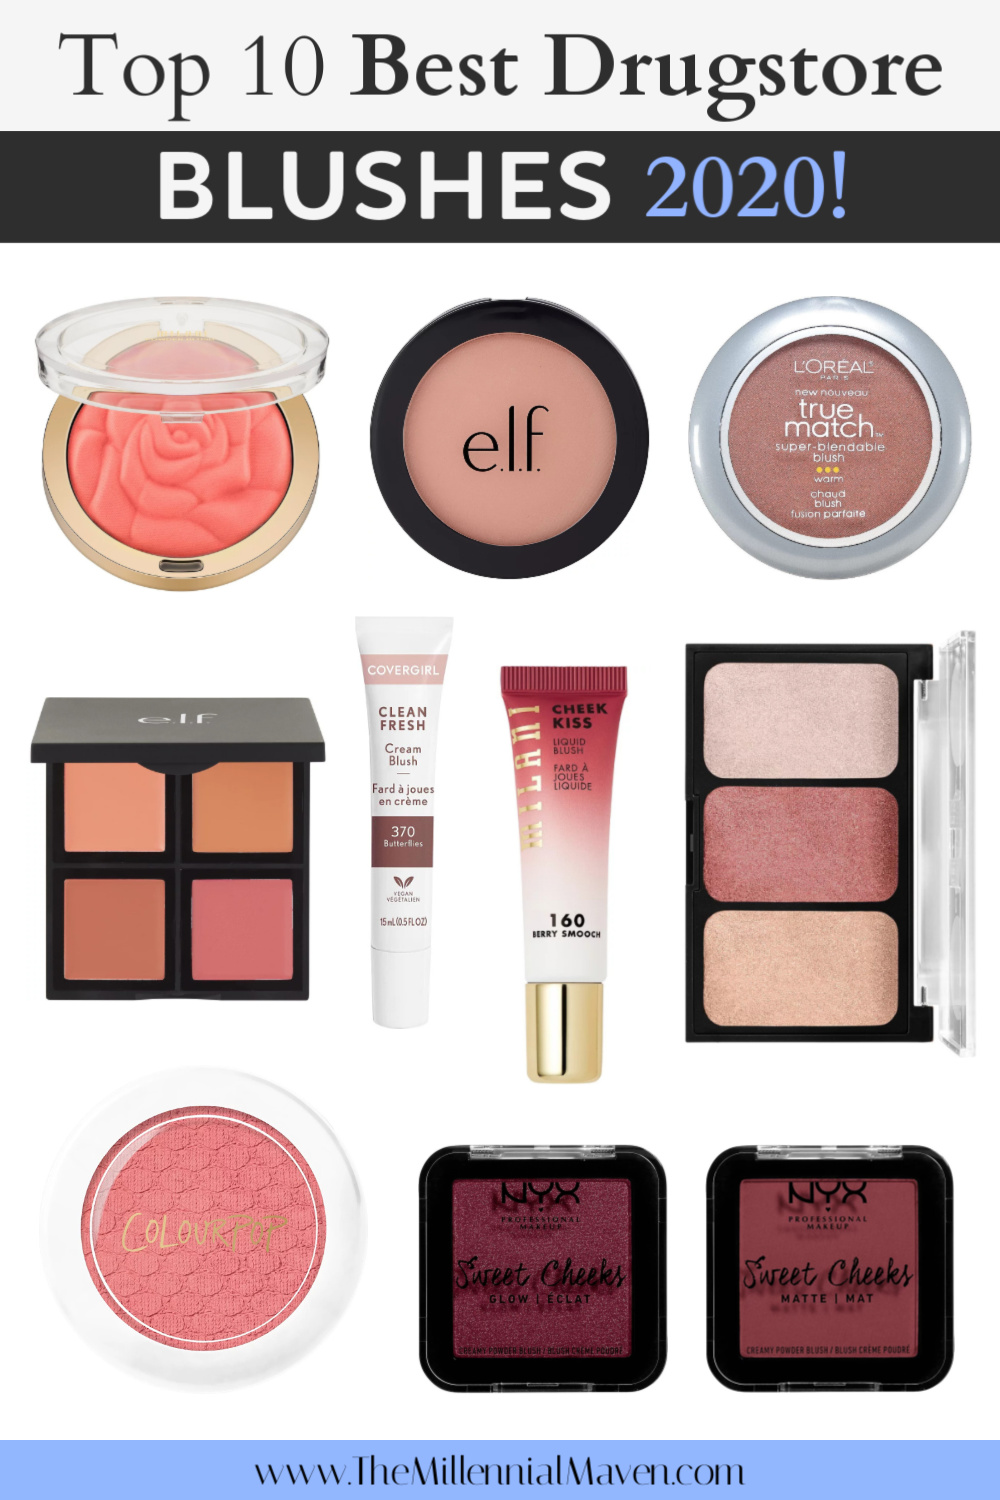 Top 10 Best Blushes at the Drugstore in 2021! | Best Drugstore Blushes